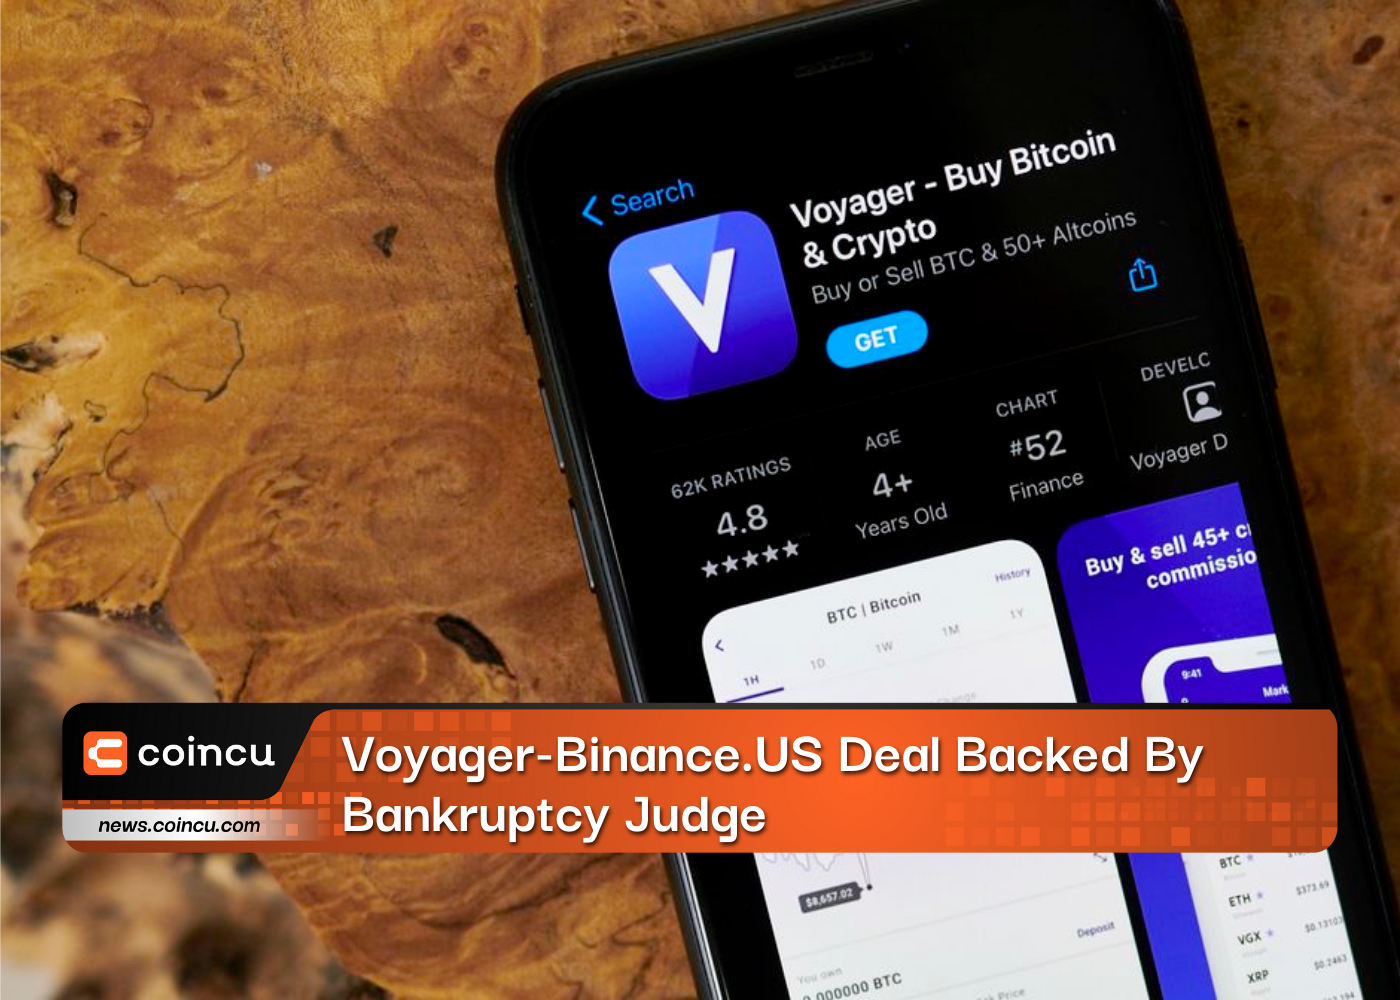 Voyager-Binance.US Deal Backed By Bankruptcy Judge